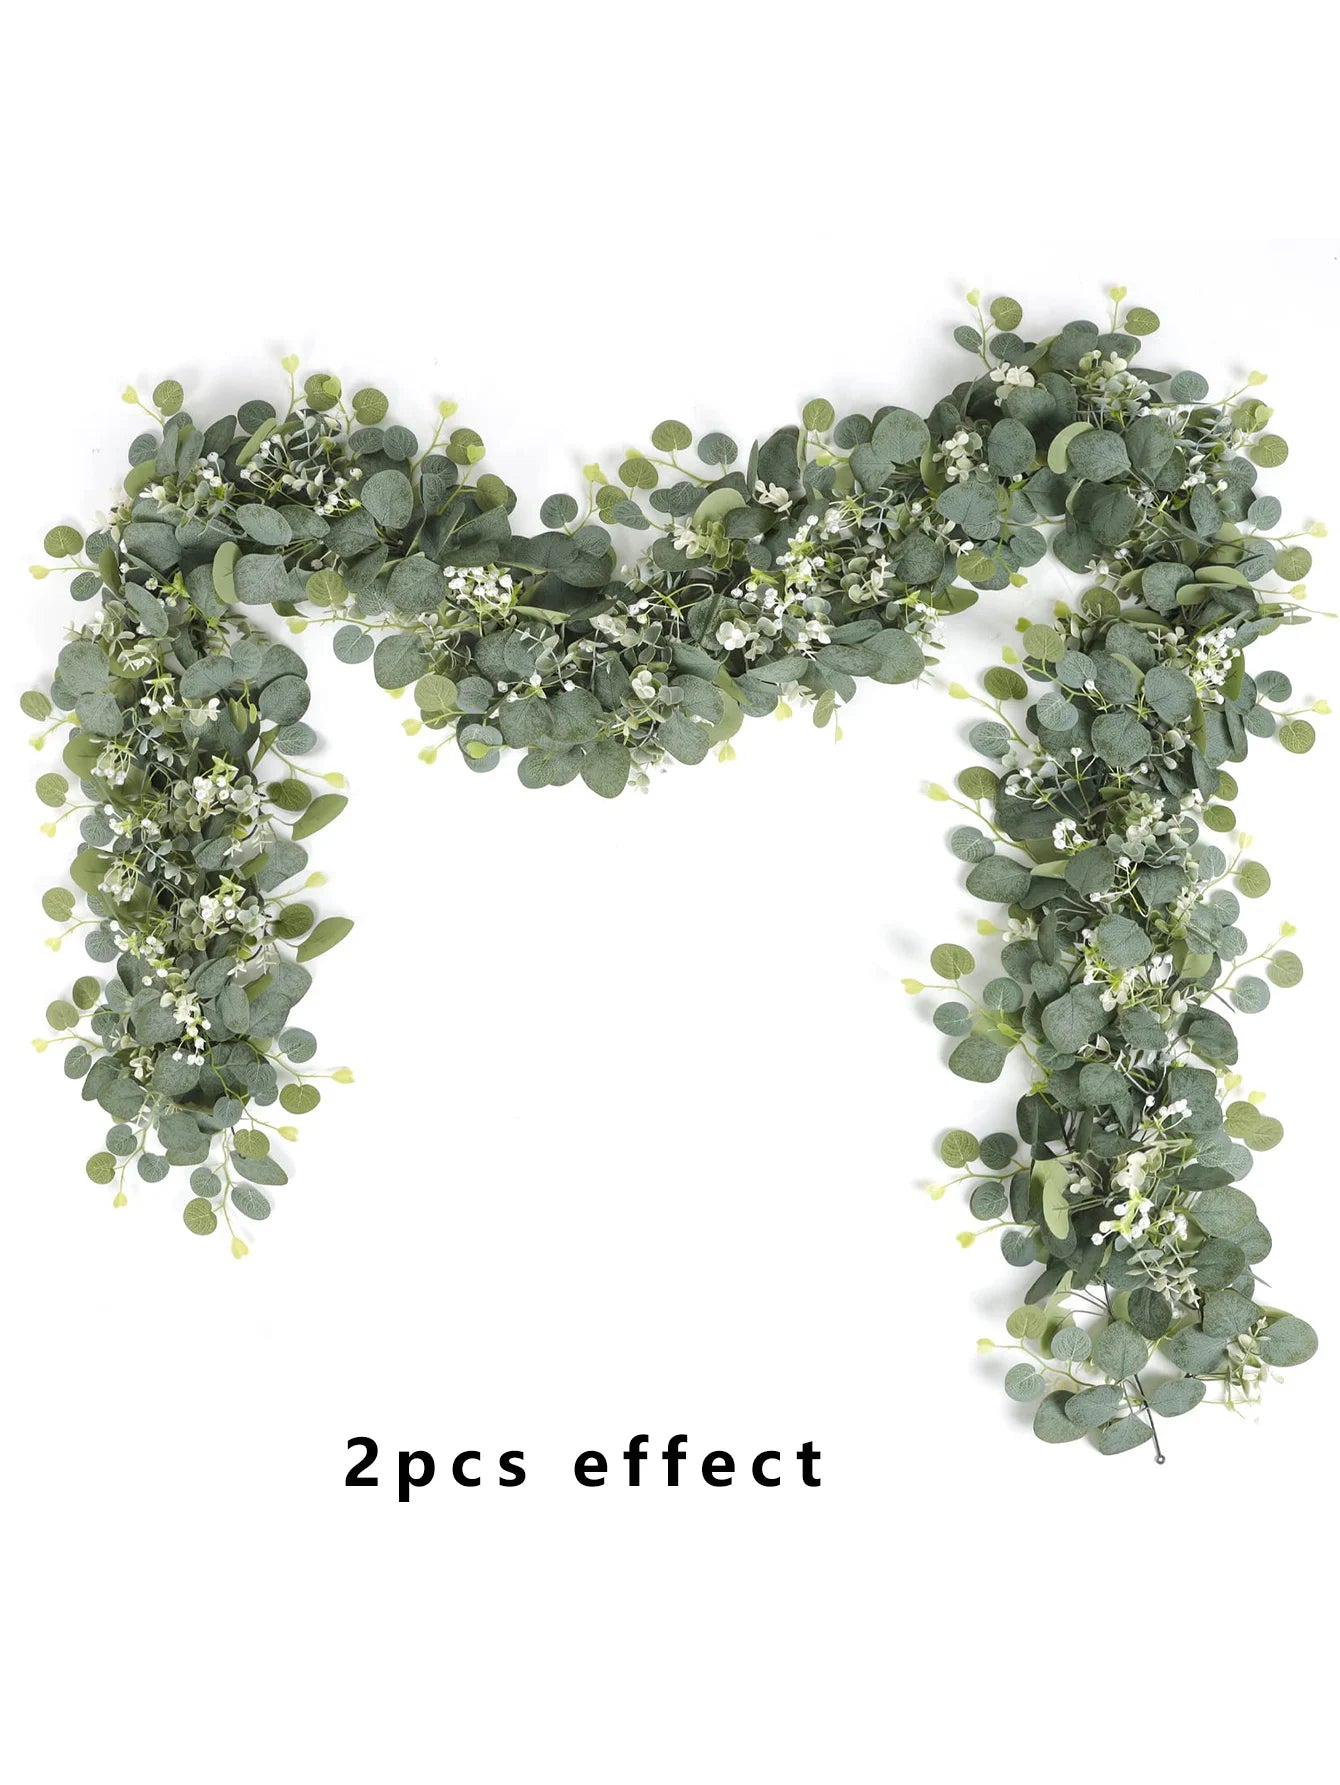 1pc Artificial Eucalyptus Leaves Greenery Garland Faux Plant Spring Vines with White Flowers Berries for Wedding Home Party Deco